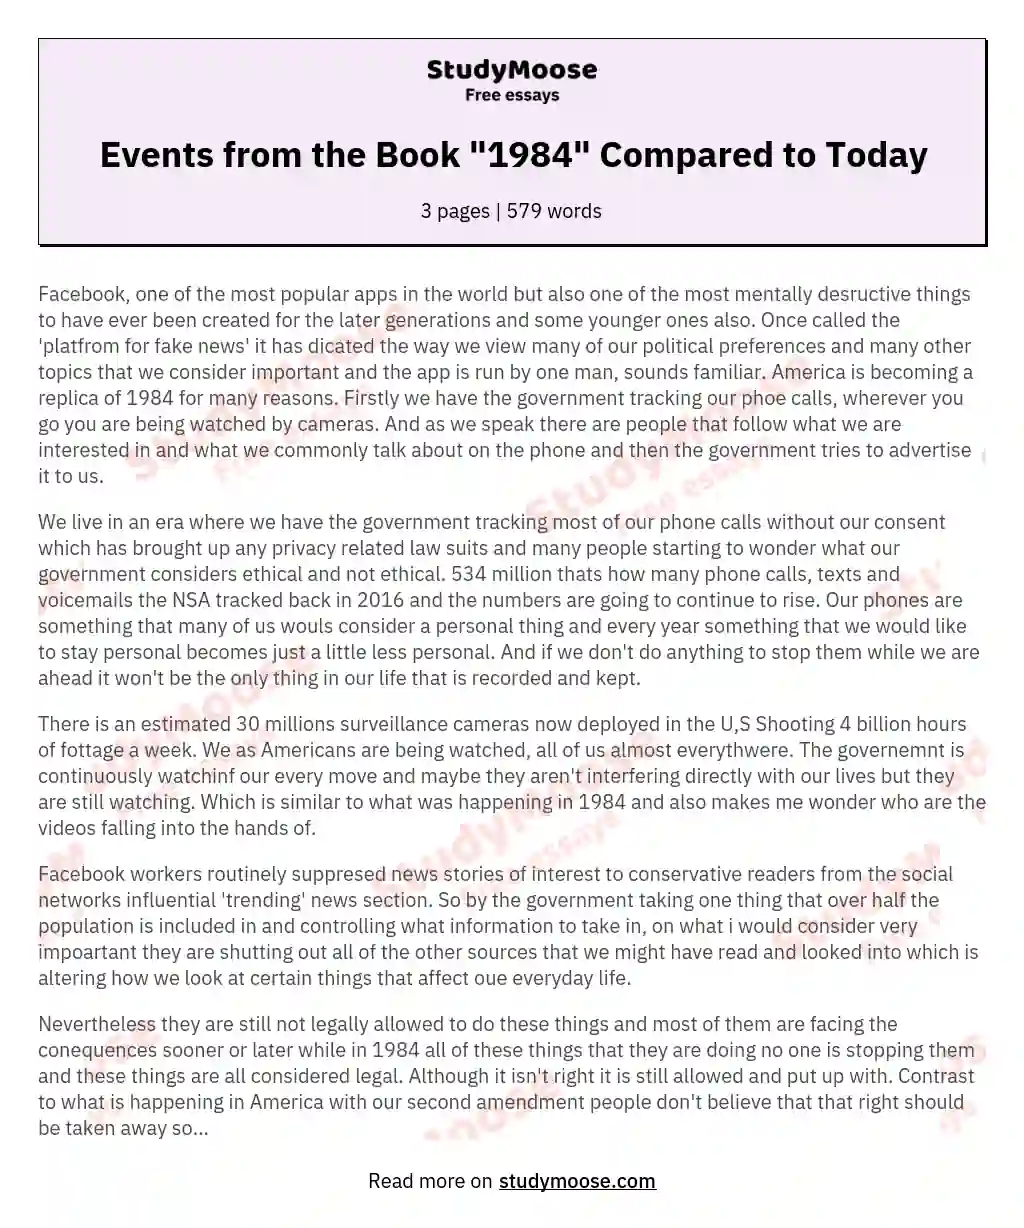 Events from the Book "1984" Compared to Today essay